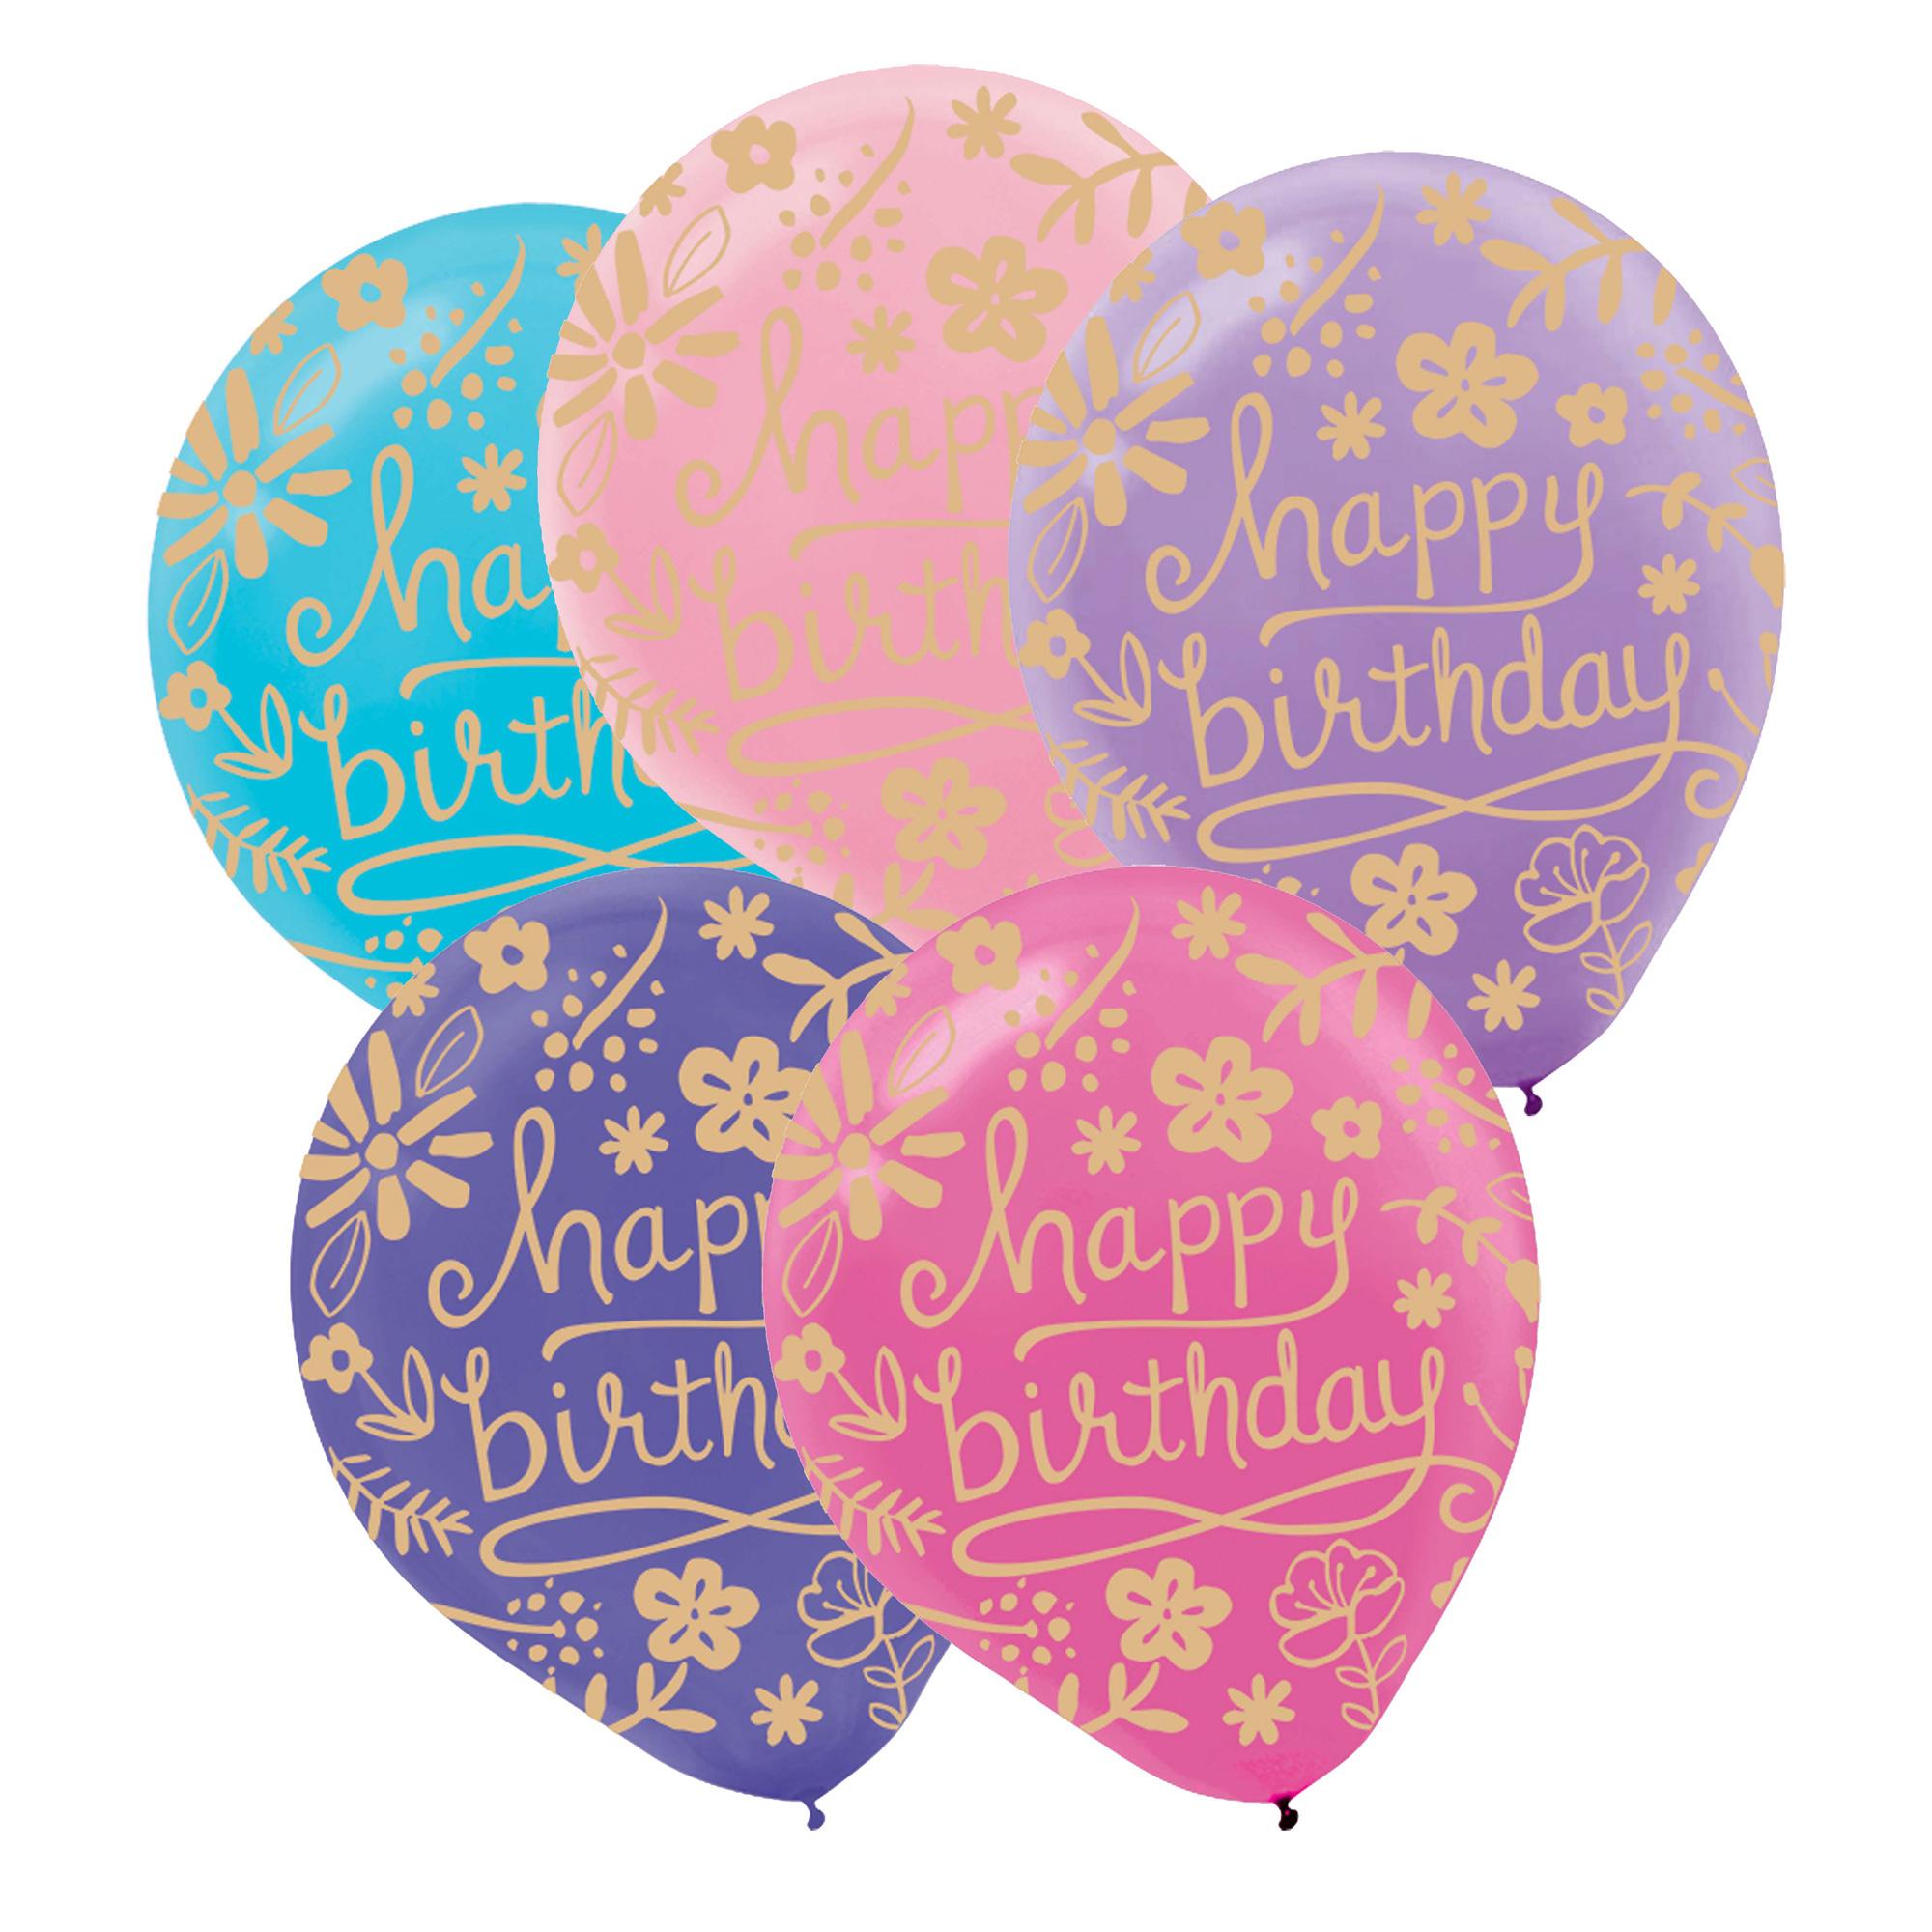 Happy Birthday Florals Latex Balloon 20ct Balloons & Streamers - Party Centre